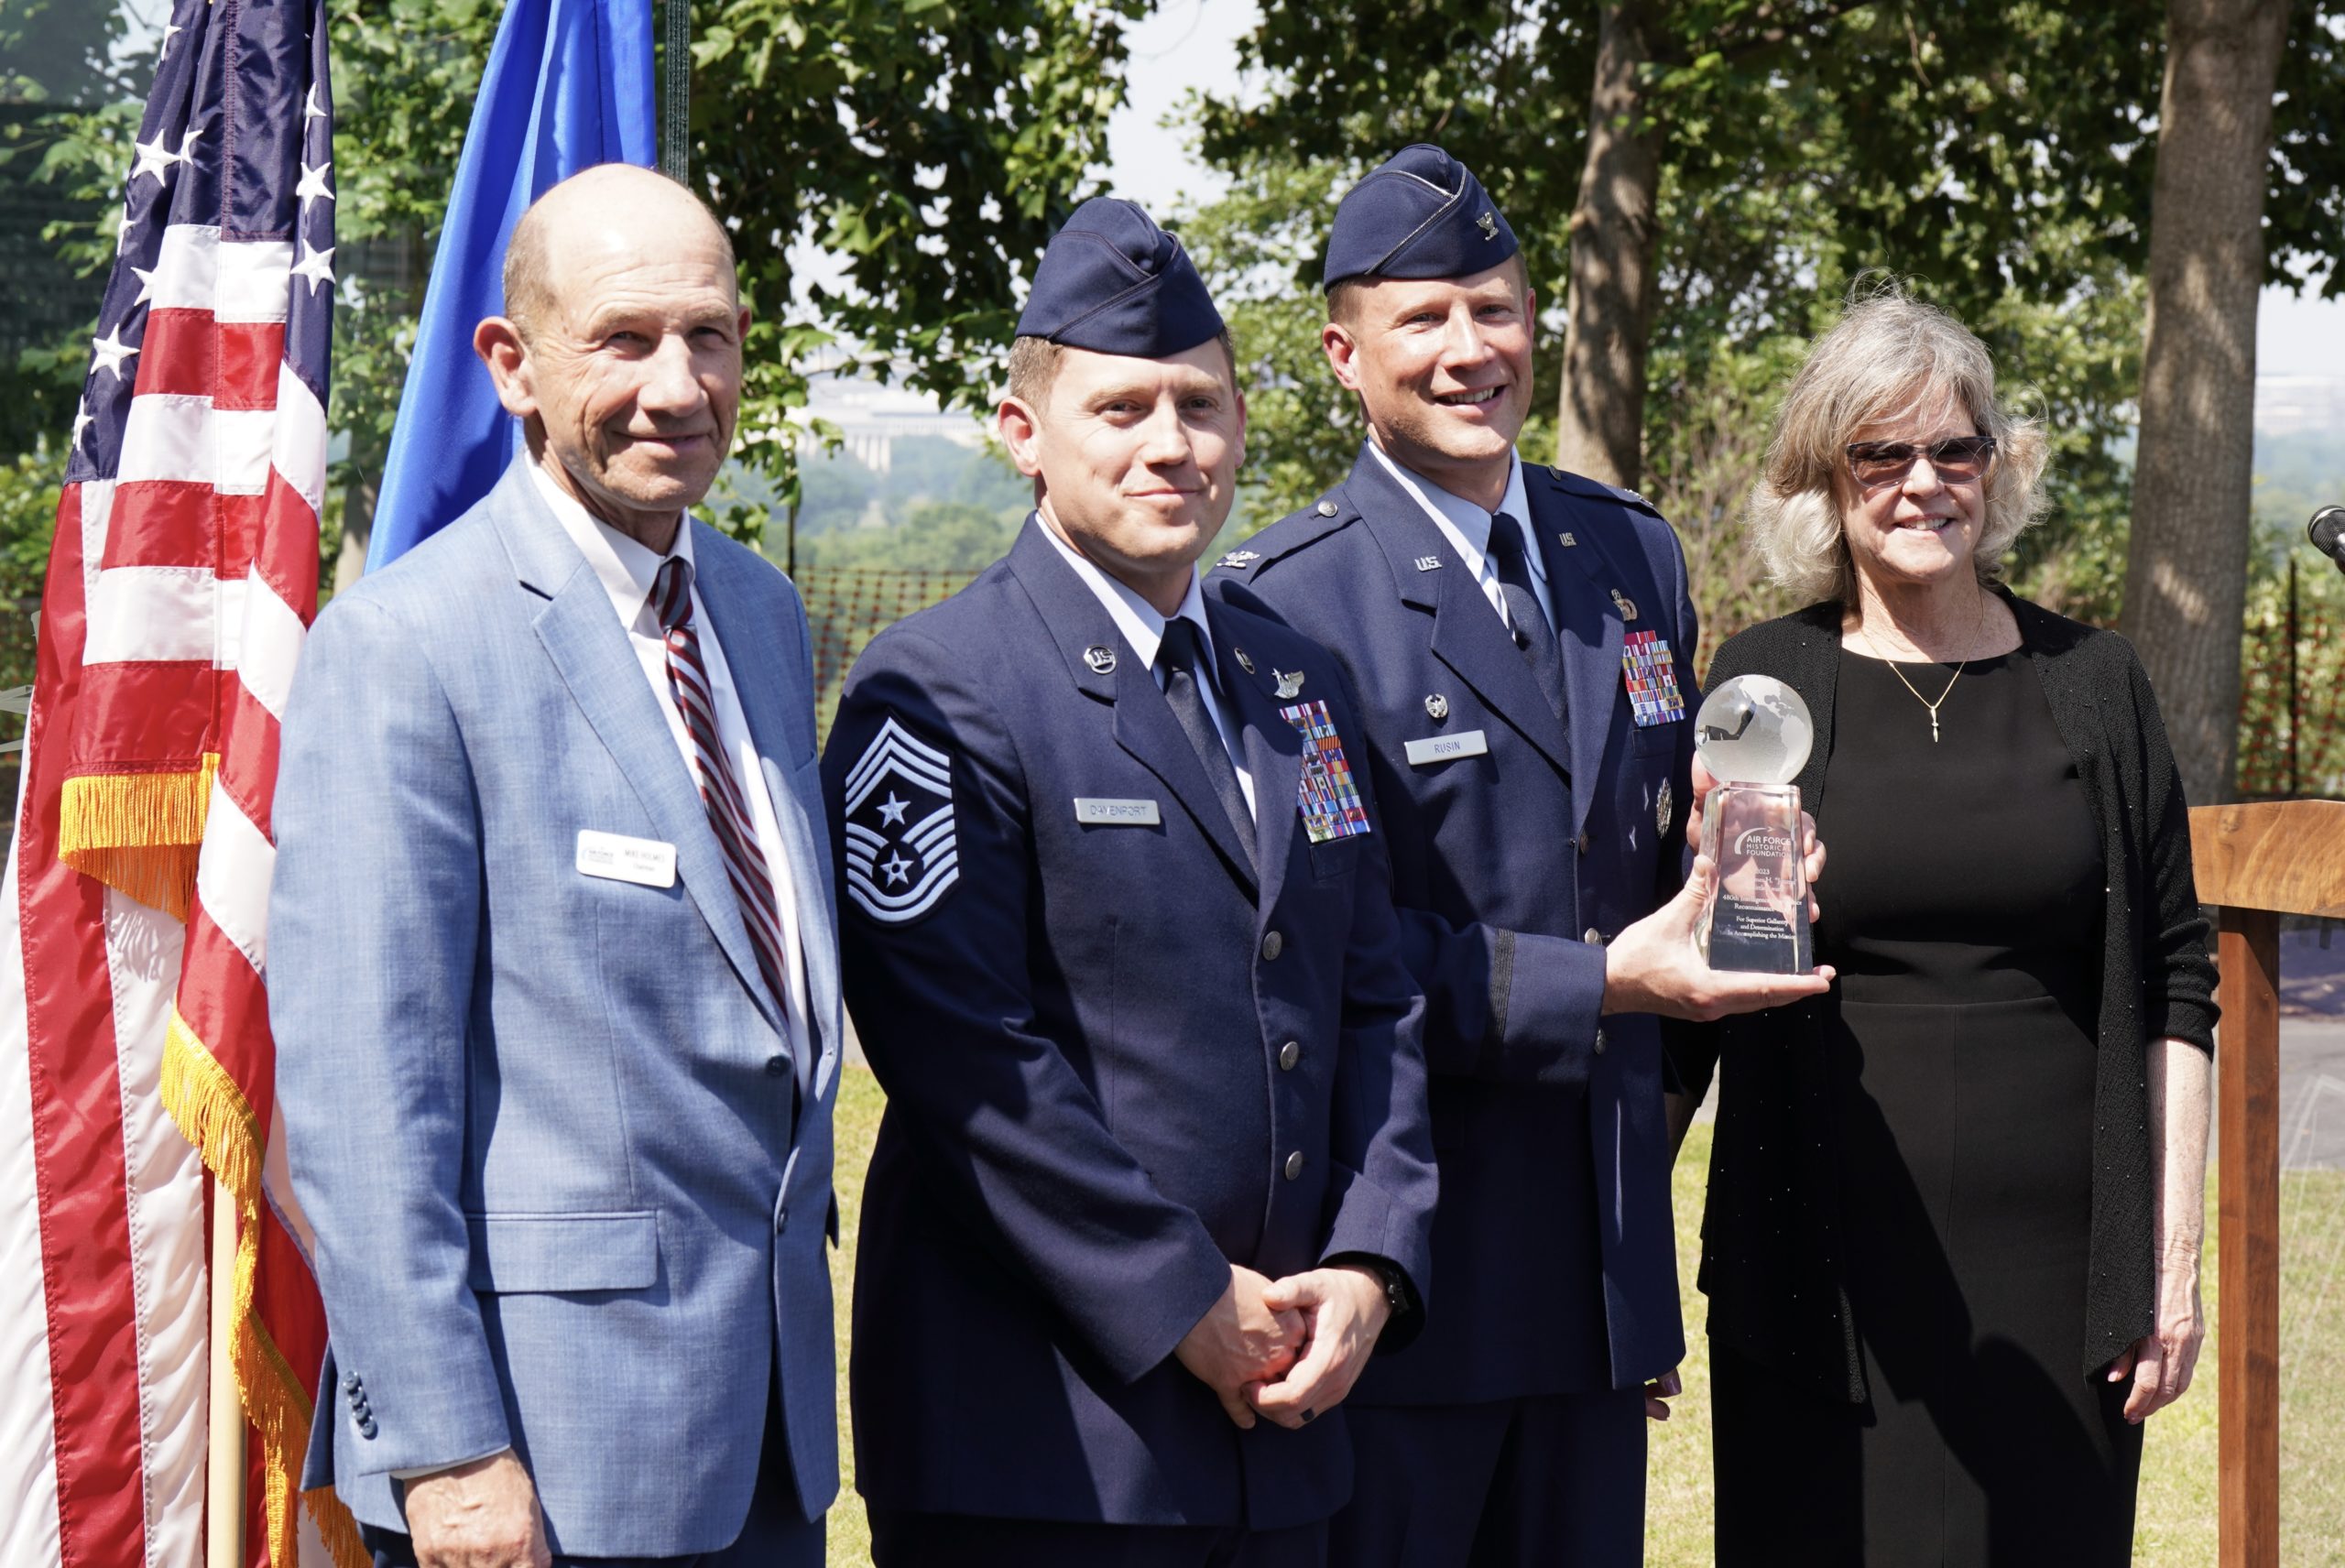 480th ISR Wing Honored with Gen. Doolittle Award